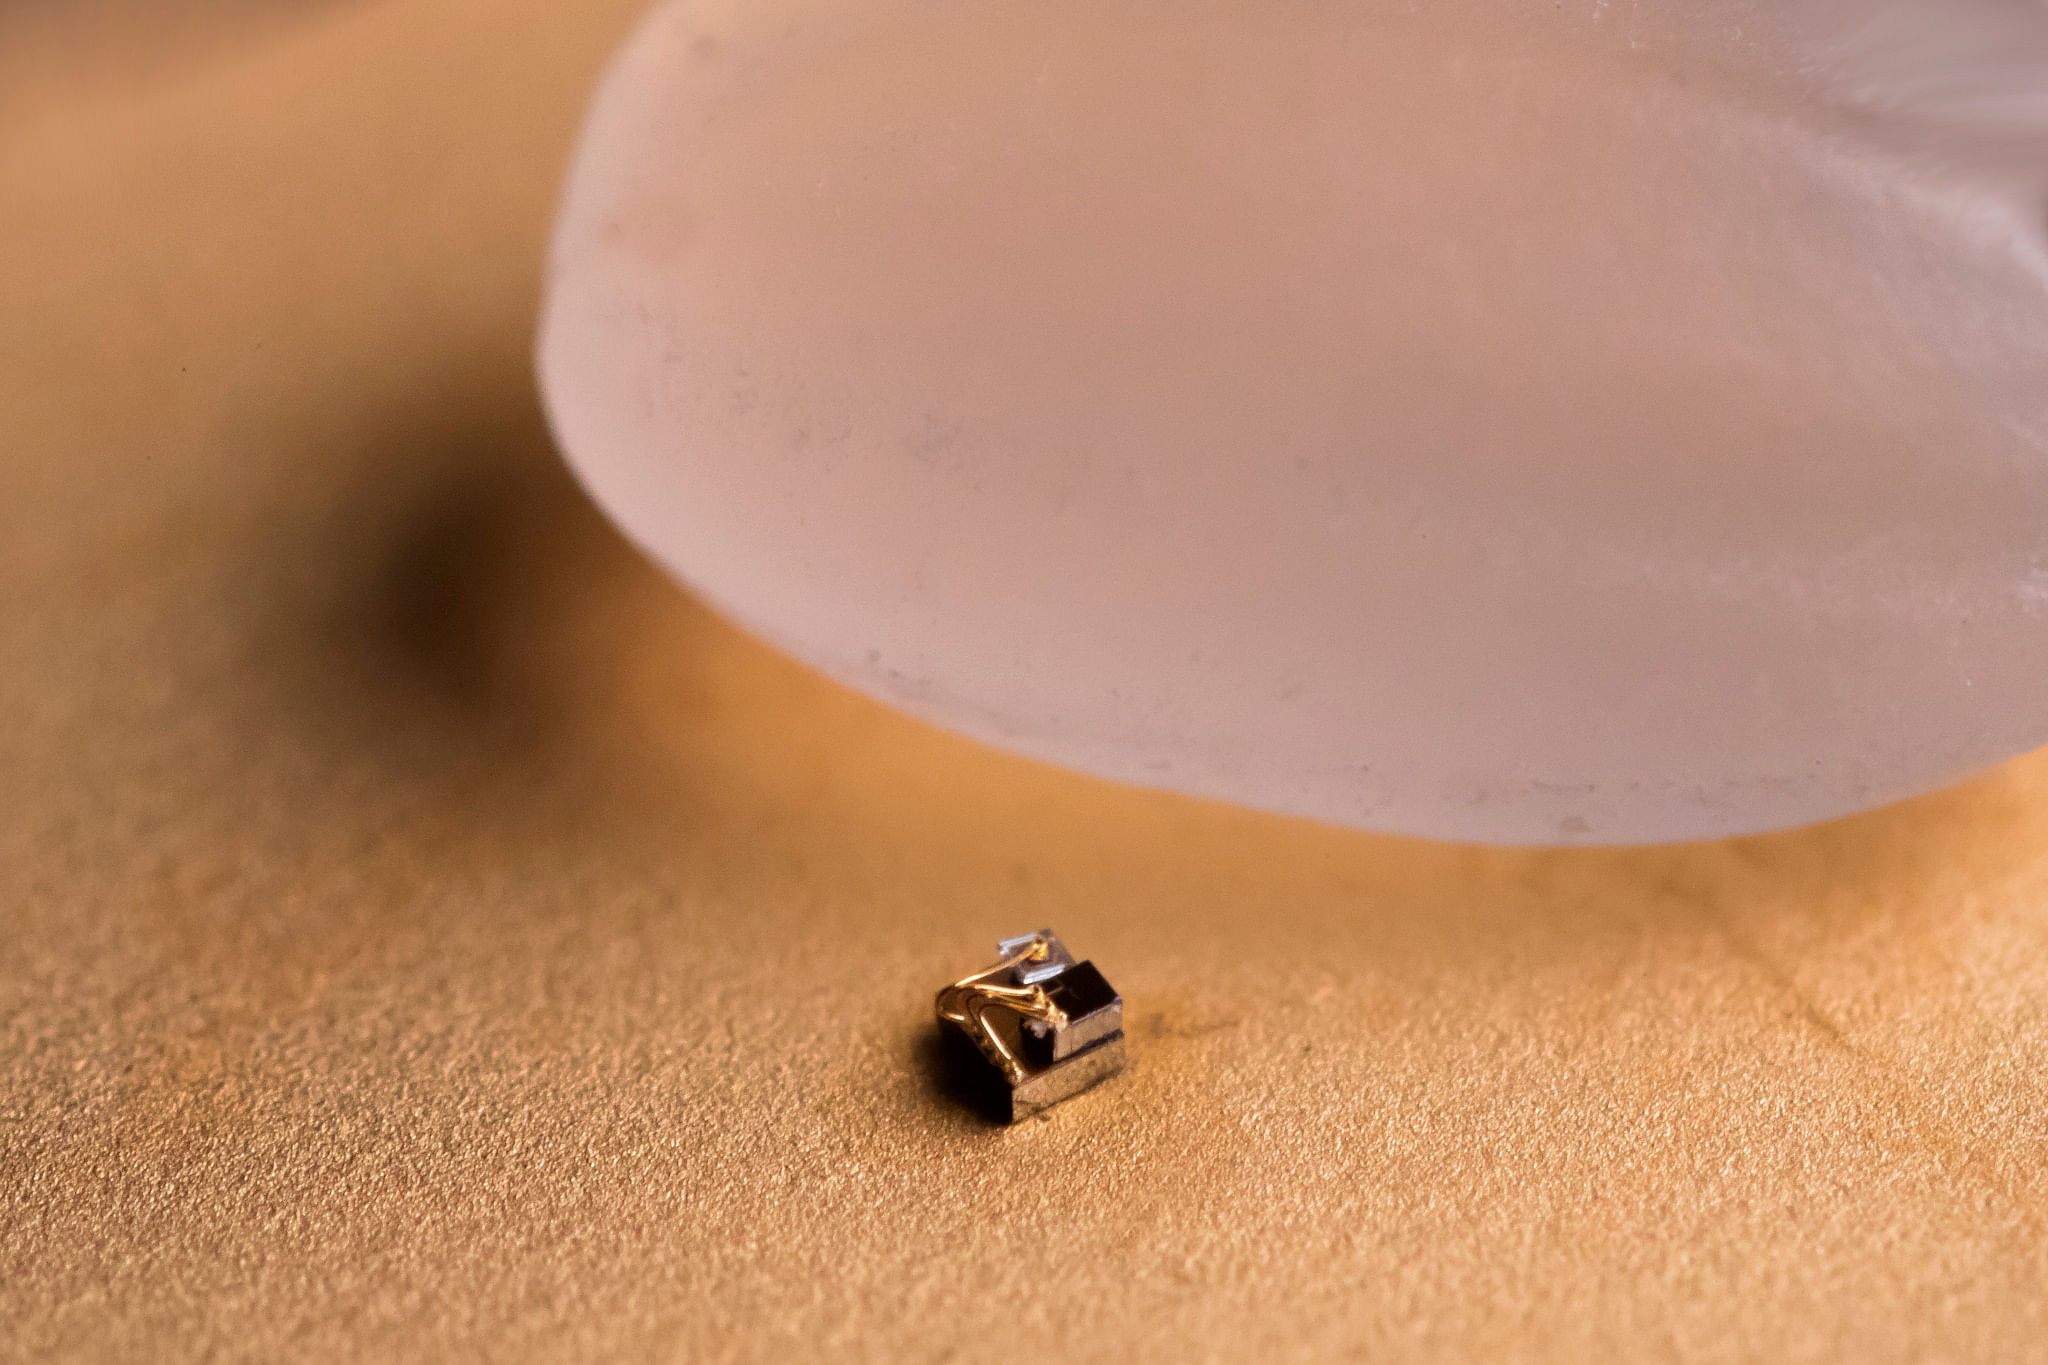 World's smallest computer – a device that measures just 0.3 millimetres and could help find new ways to monitor and treat cancer. (Credit: University of Michigan News/Flickr)